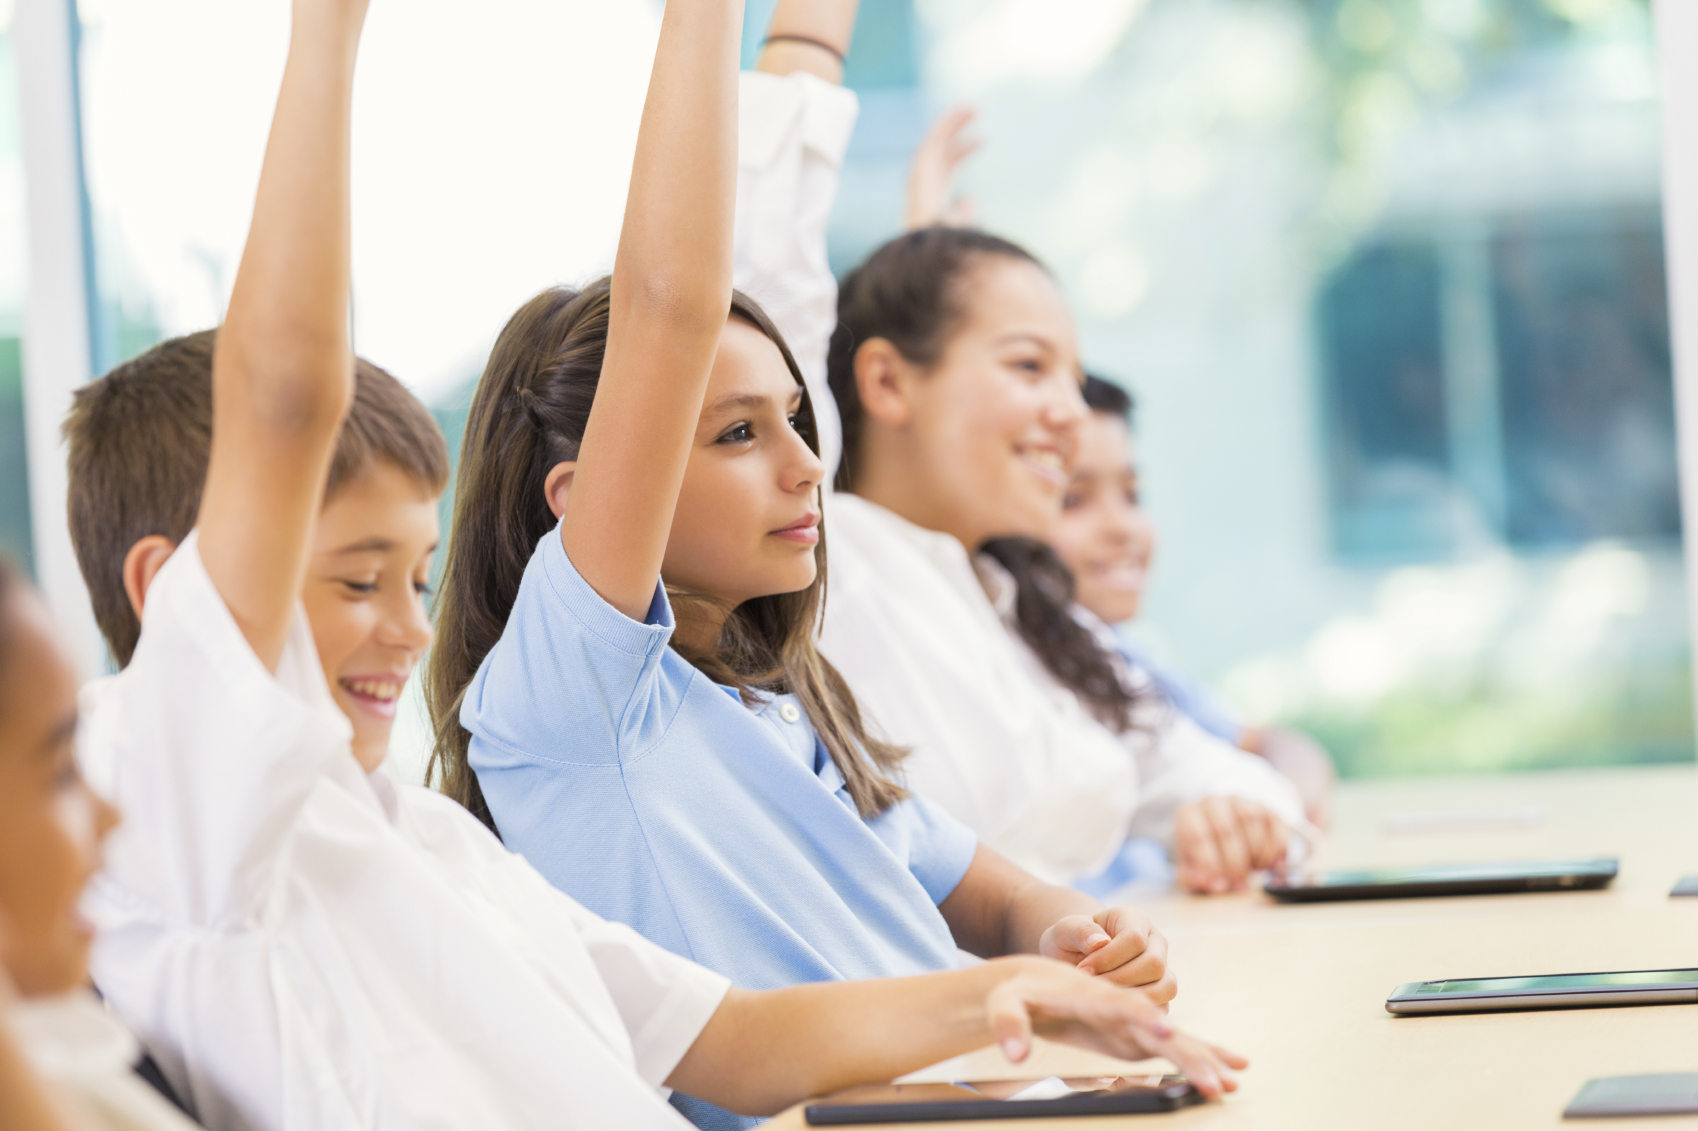 Students in a classroom with their hands up.